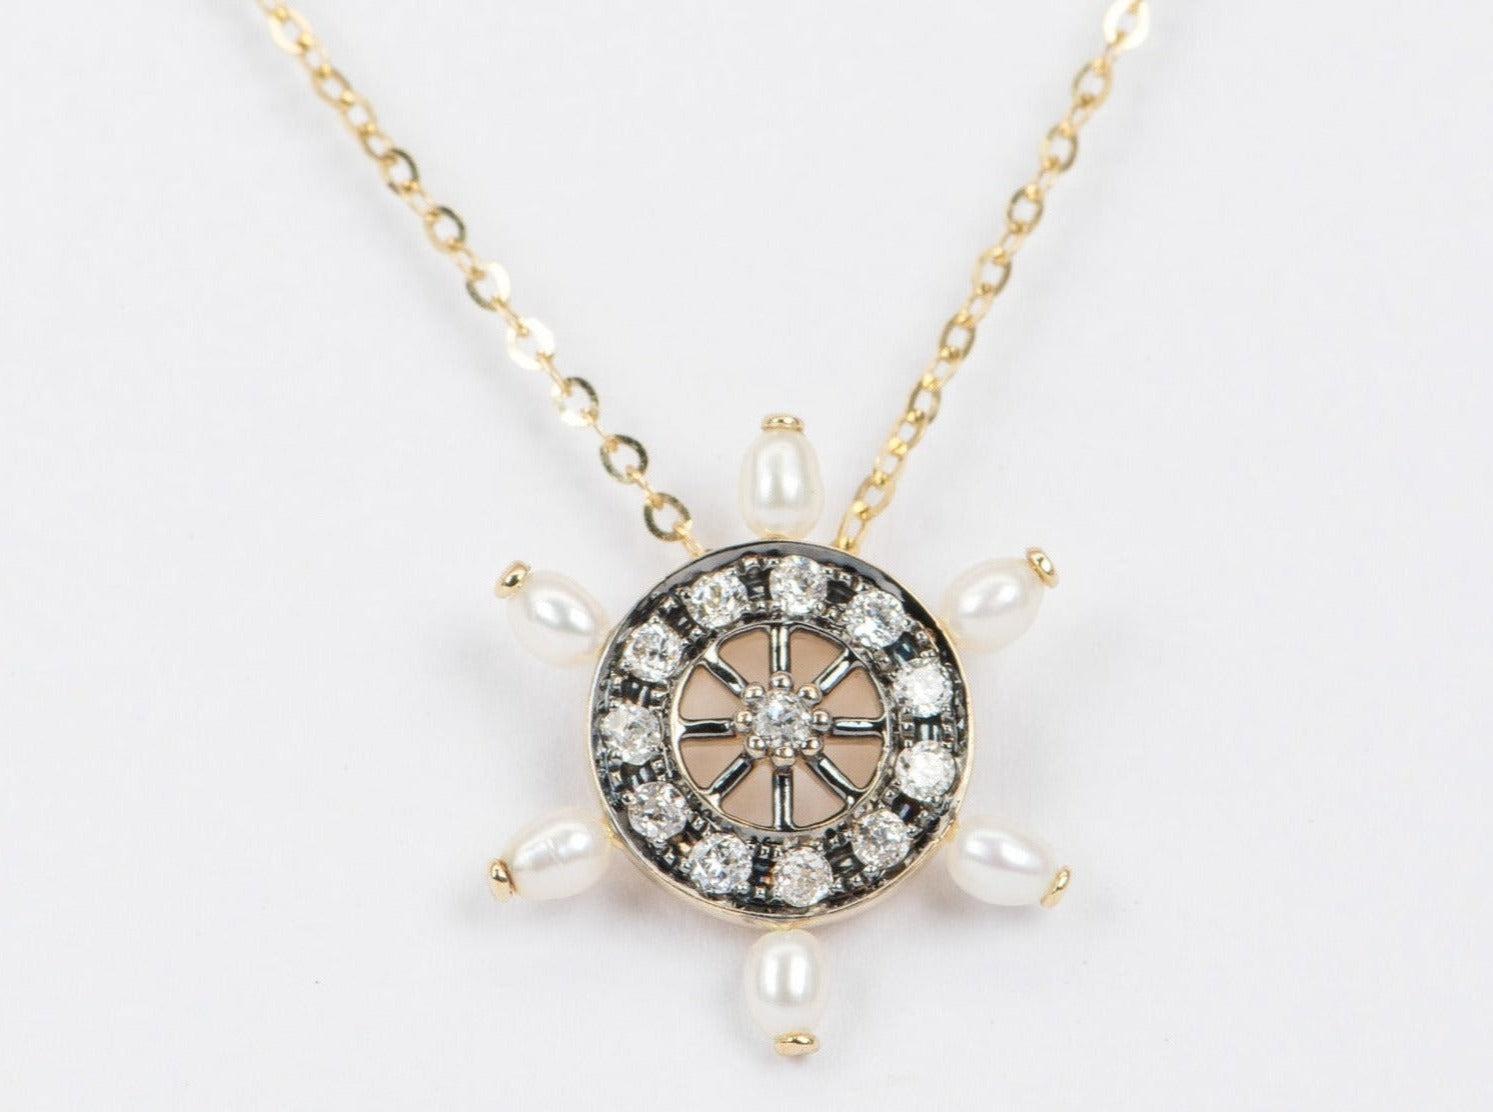 ♥ Solid 14k yellow gold vintage inspired pearl and diamond wheel pendant
♥ The item measures 19.8mm in length, 17.5mm in width, and 13.2mm in height.

♥ Gemstone: Freshwater pearls (all natural colors, no dye or treatment)
♥ All stone(s) used are